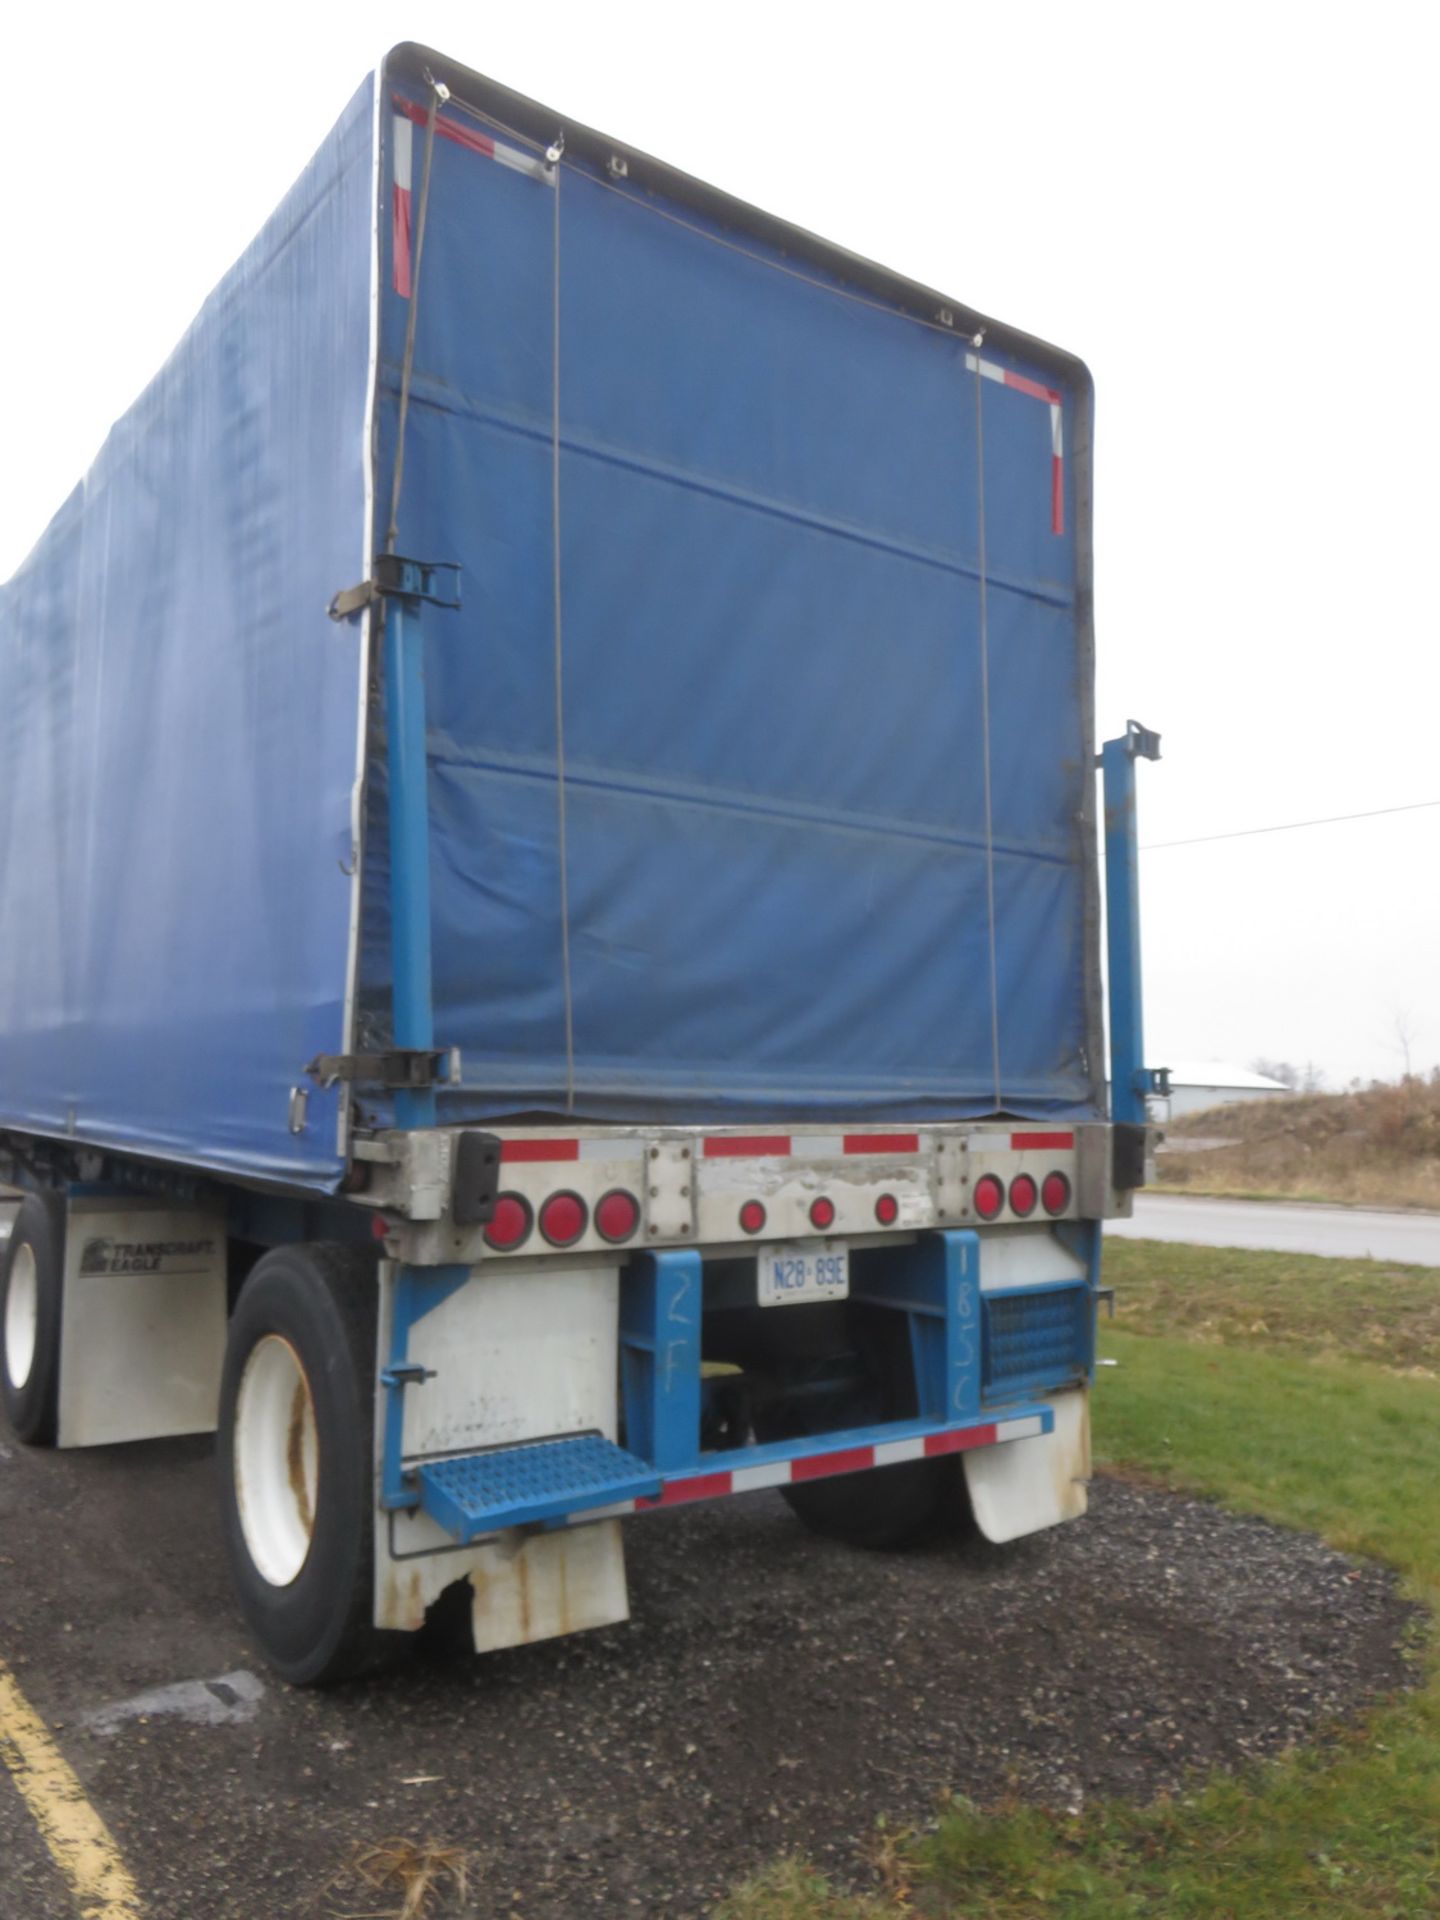 LODE KING 48' TANDEM AXLE BLUE CURTAIN SIDE TRAILER - S/N 2LDPA4829XC032084 - Image 6 of 6